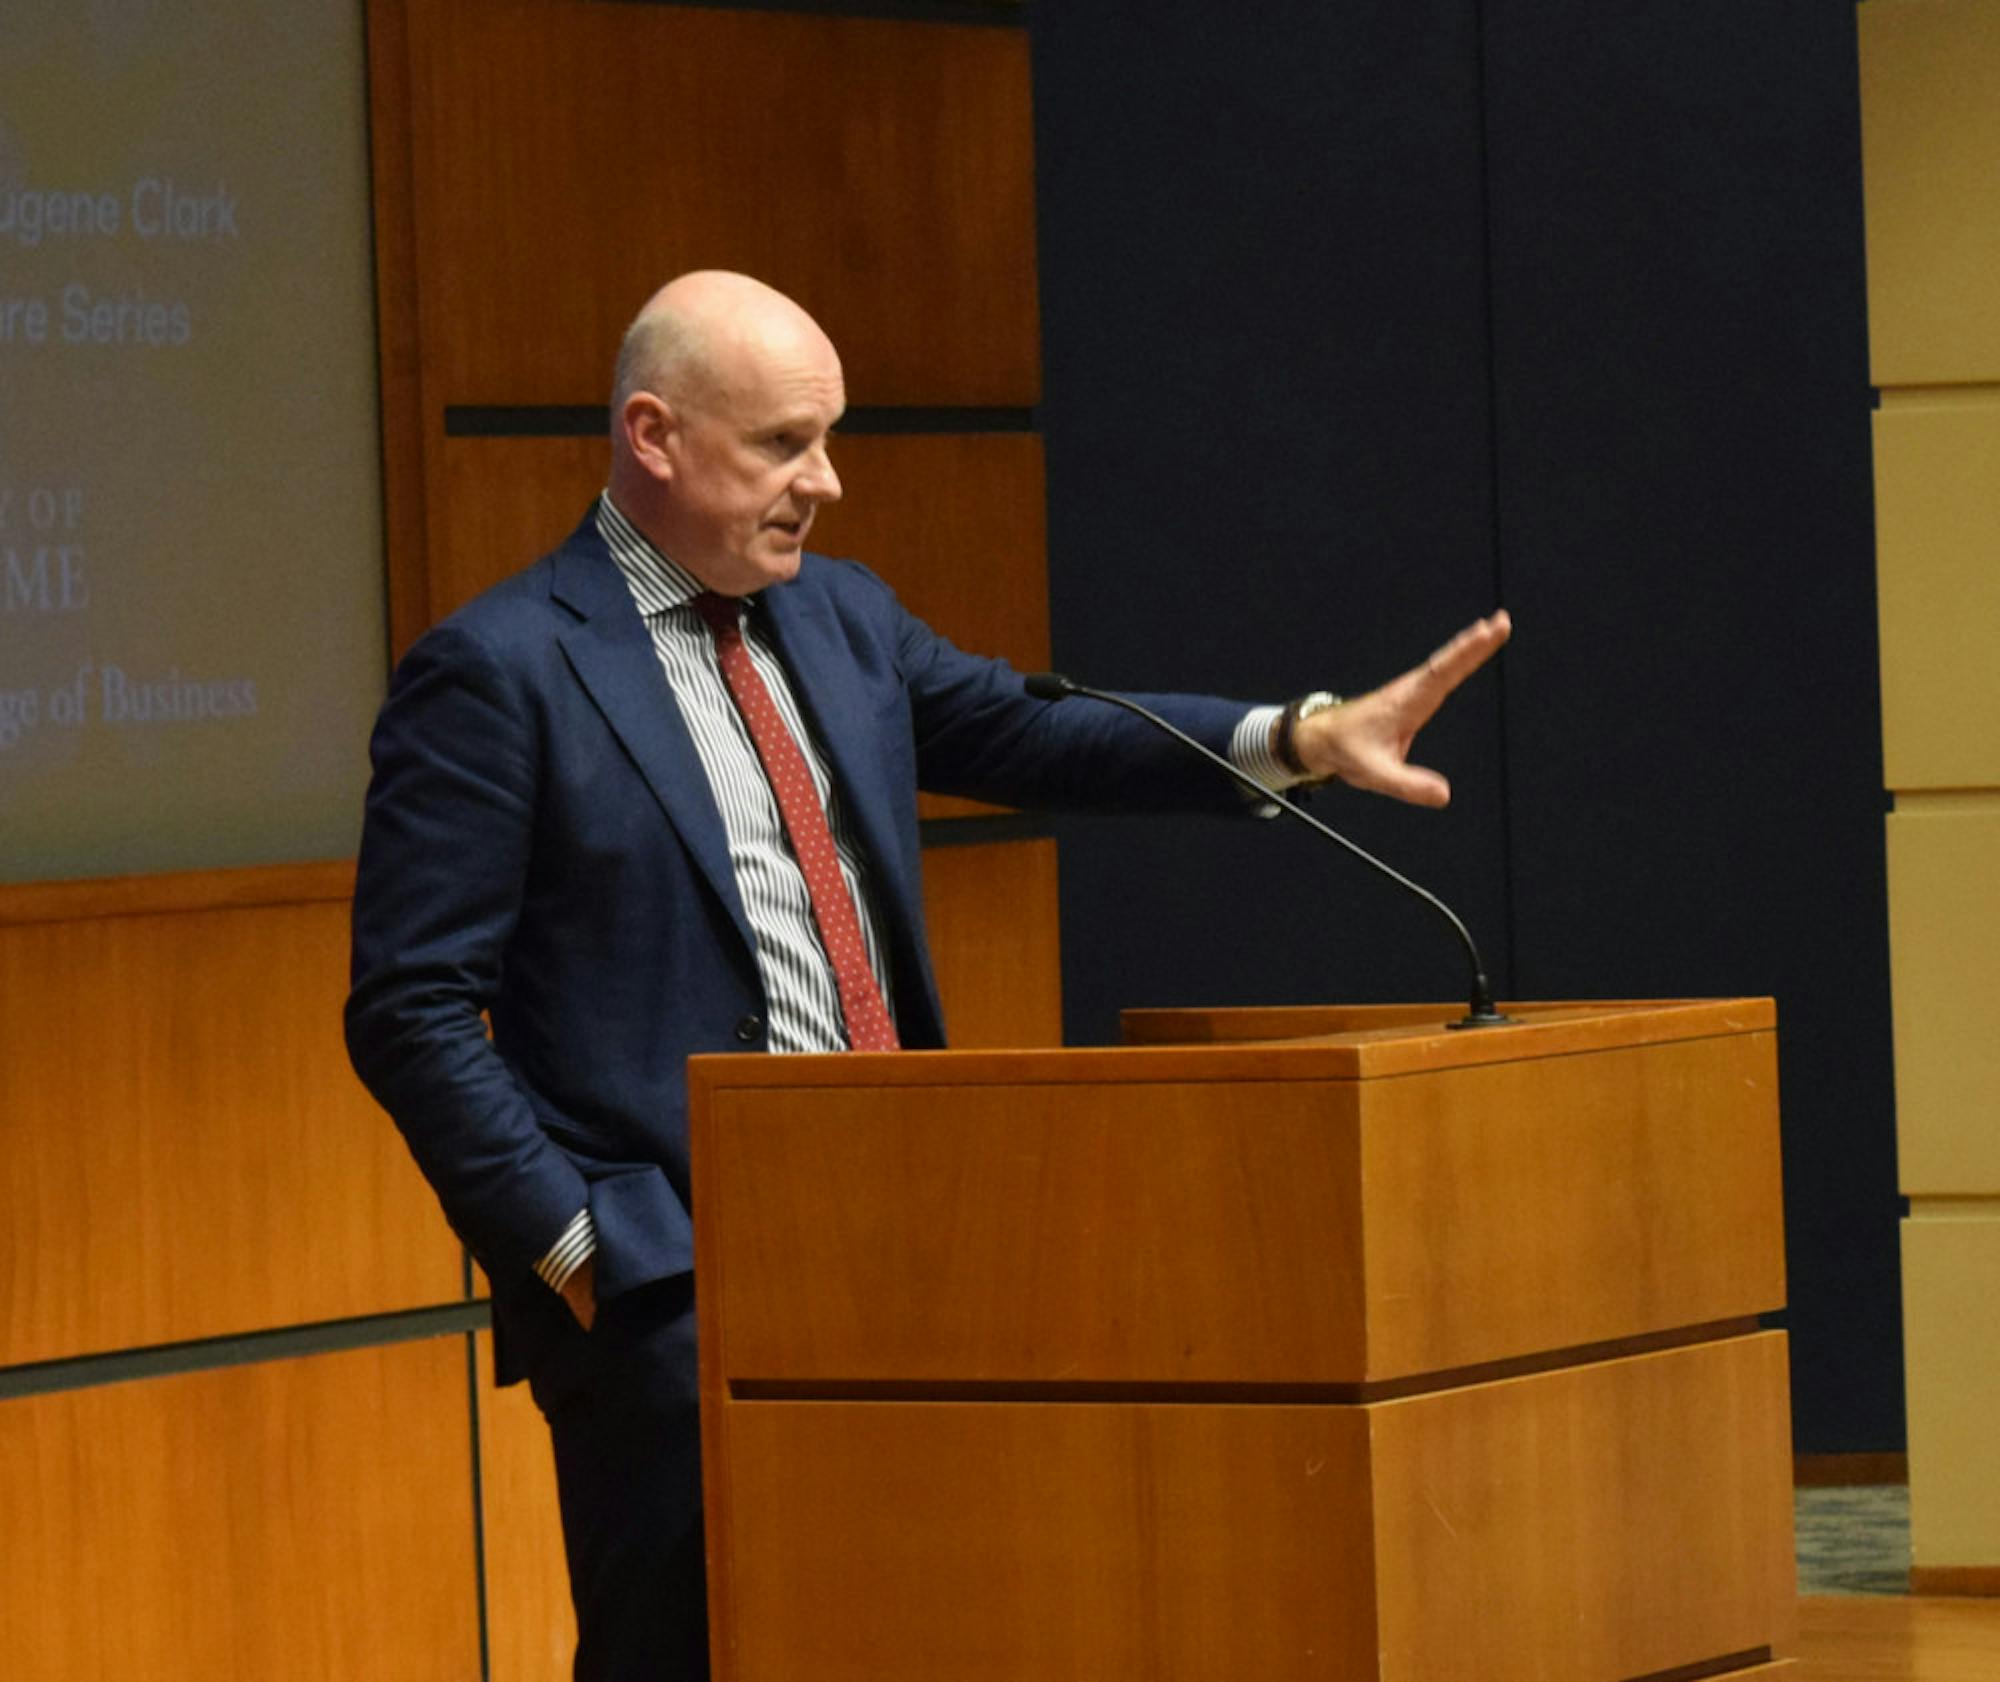 Gerard Baker speaks in the Jordan Auditorium of the Mendoza College of Business on Monday night. Baker, editor-in-chief of the Wall Street Journal, spoke on the rhetoric of the 2016 presidential election.